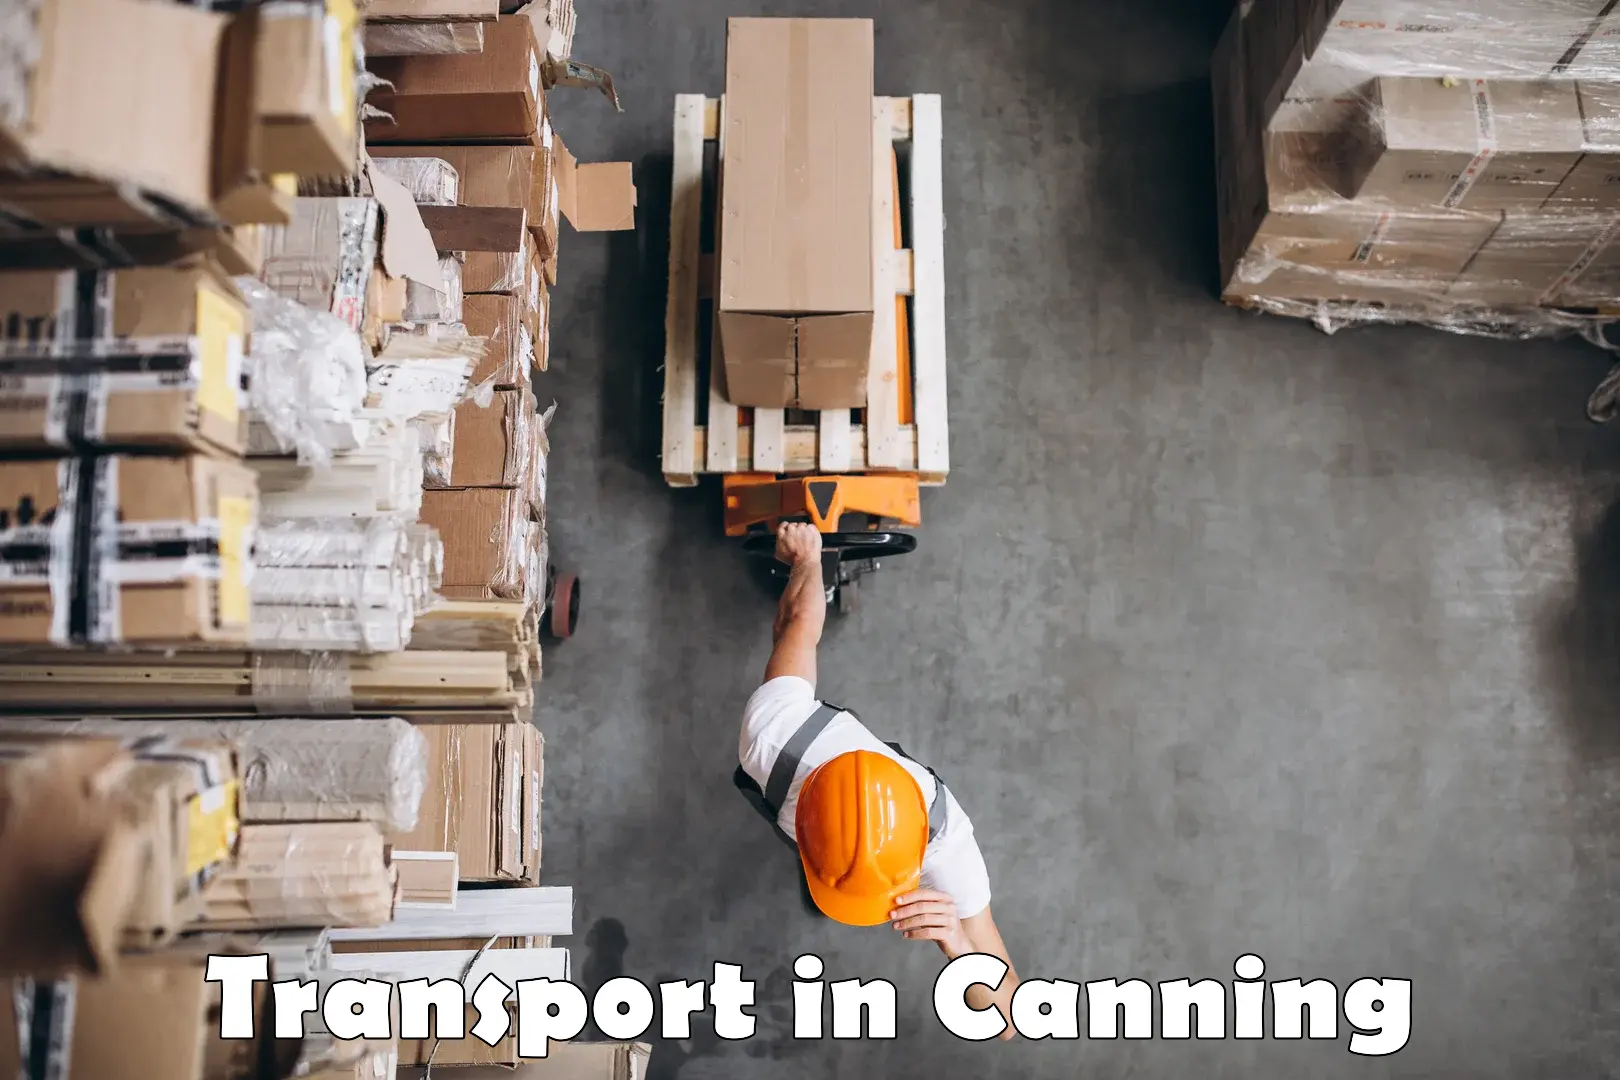 Land transport services in Canning